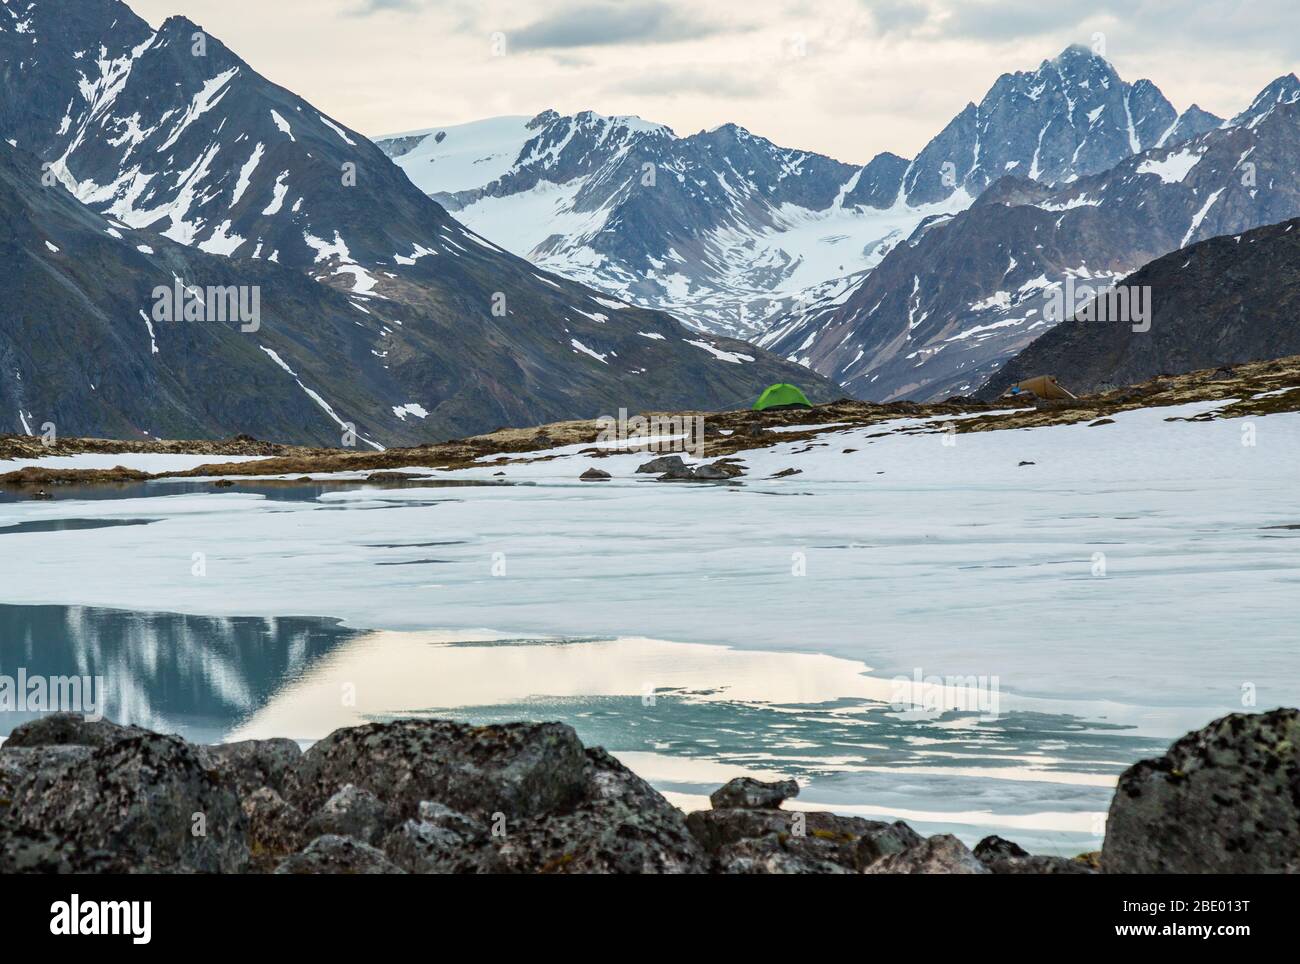 Small green one-person tent above mostly frozen lake in the Alaskan wilderness. Beyond camp are snowy glaciers and craggy summits. Stock Photo